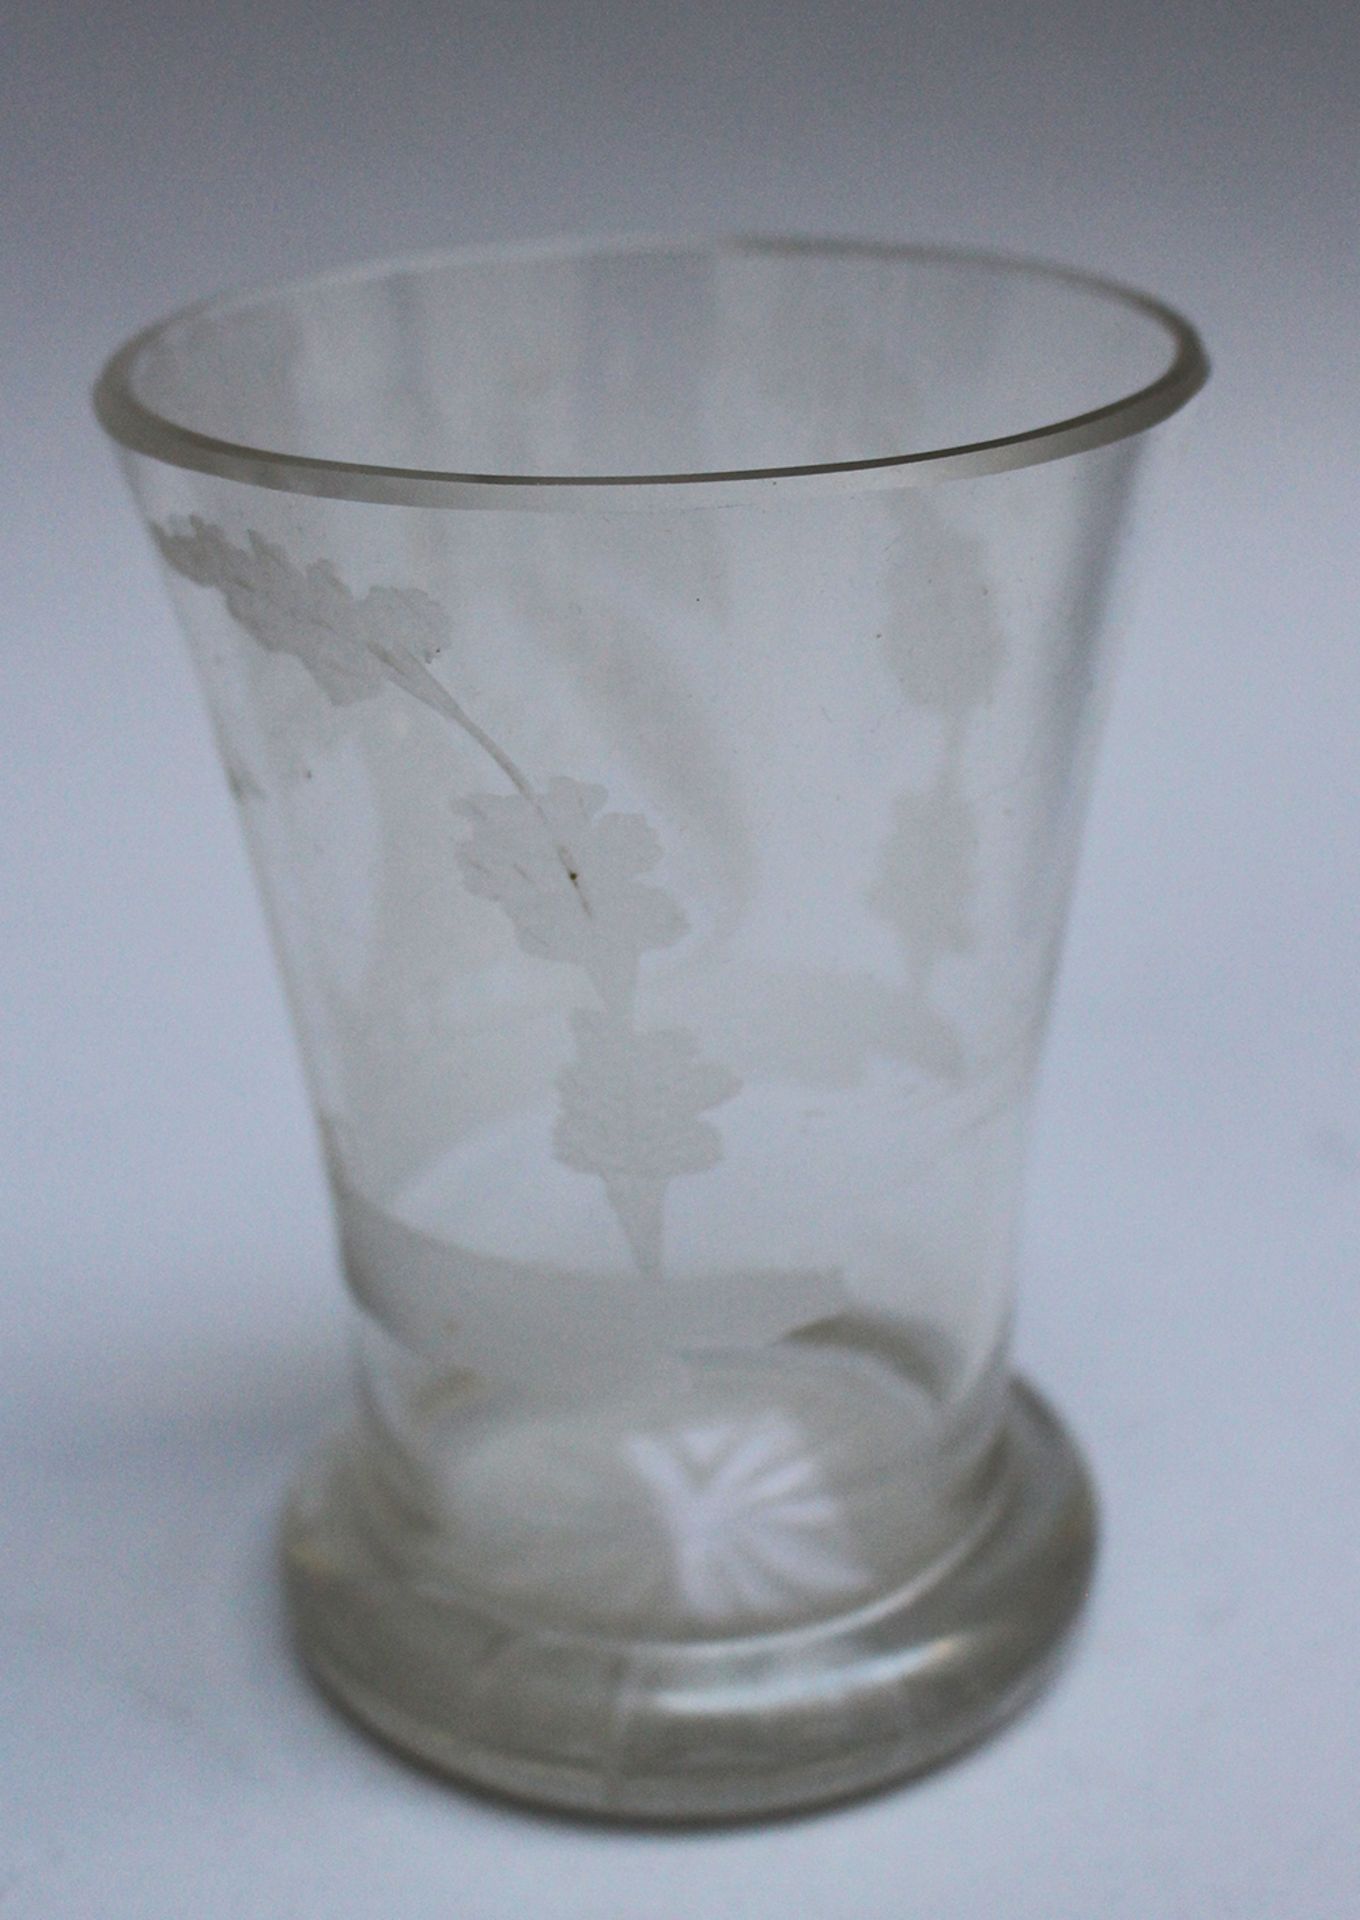 Friendship beaker, transparent glass with etched eagle and classical decoration described - Image 2 of 3